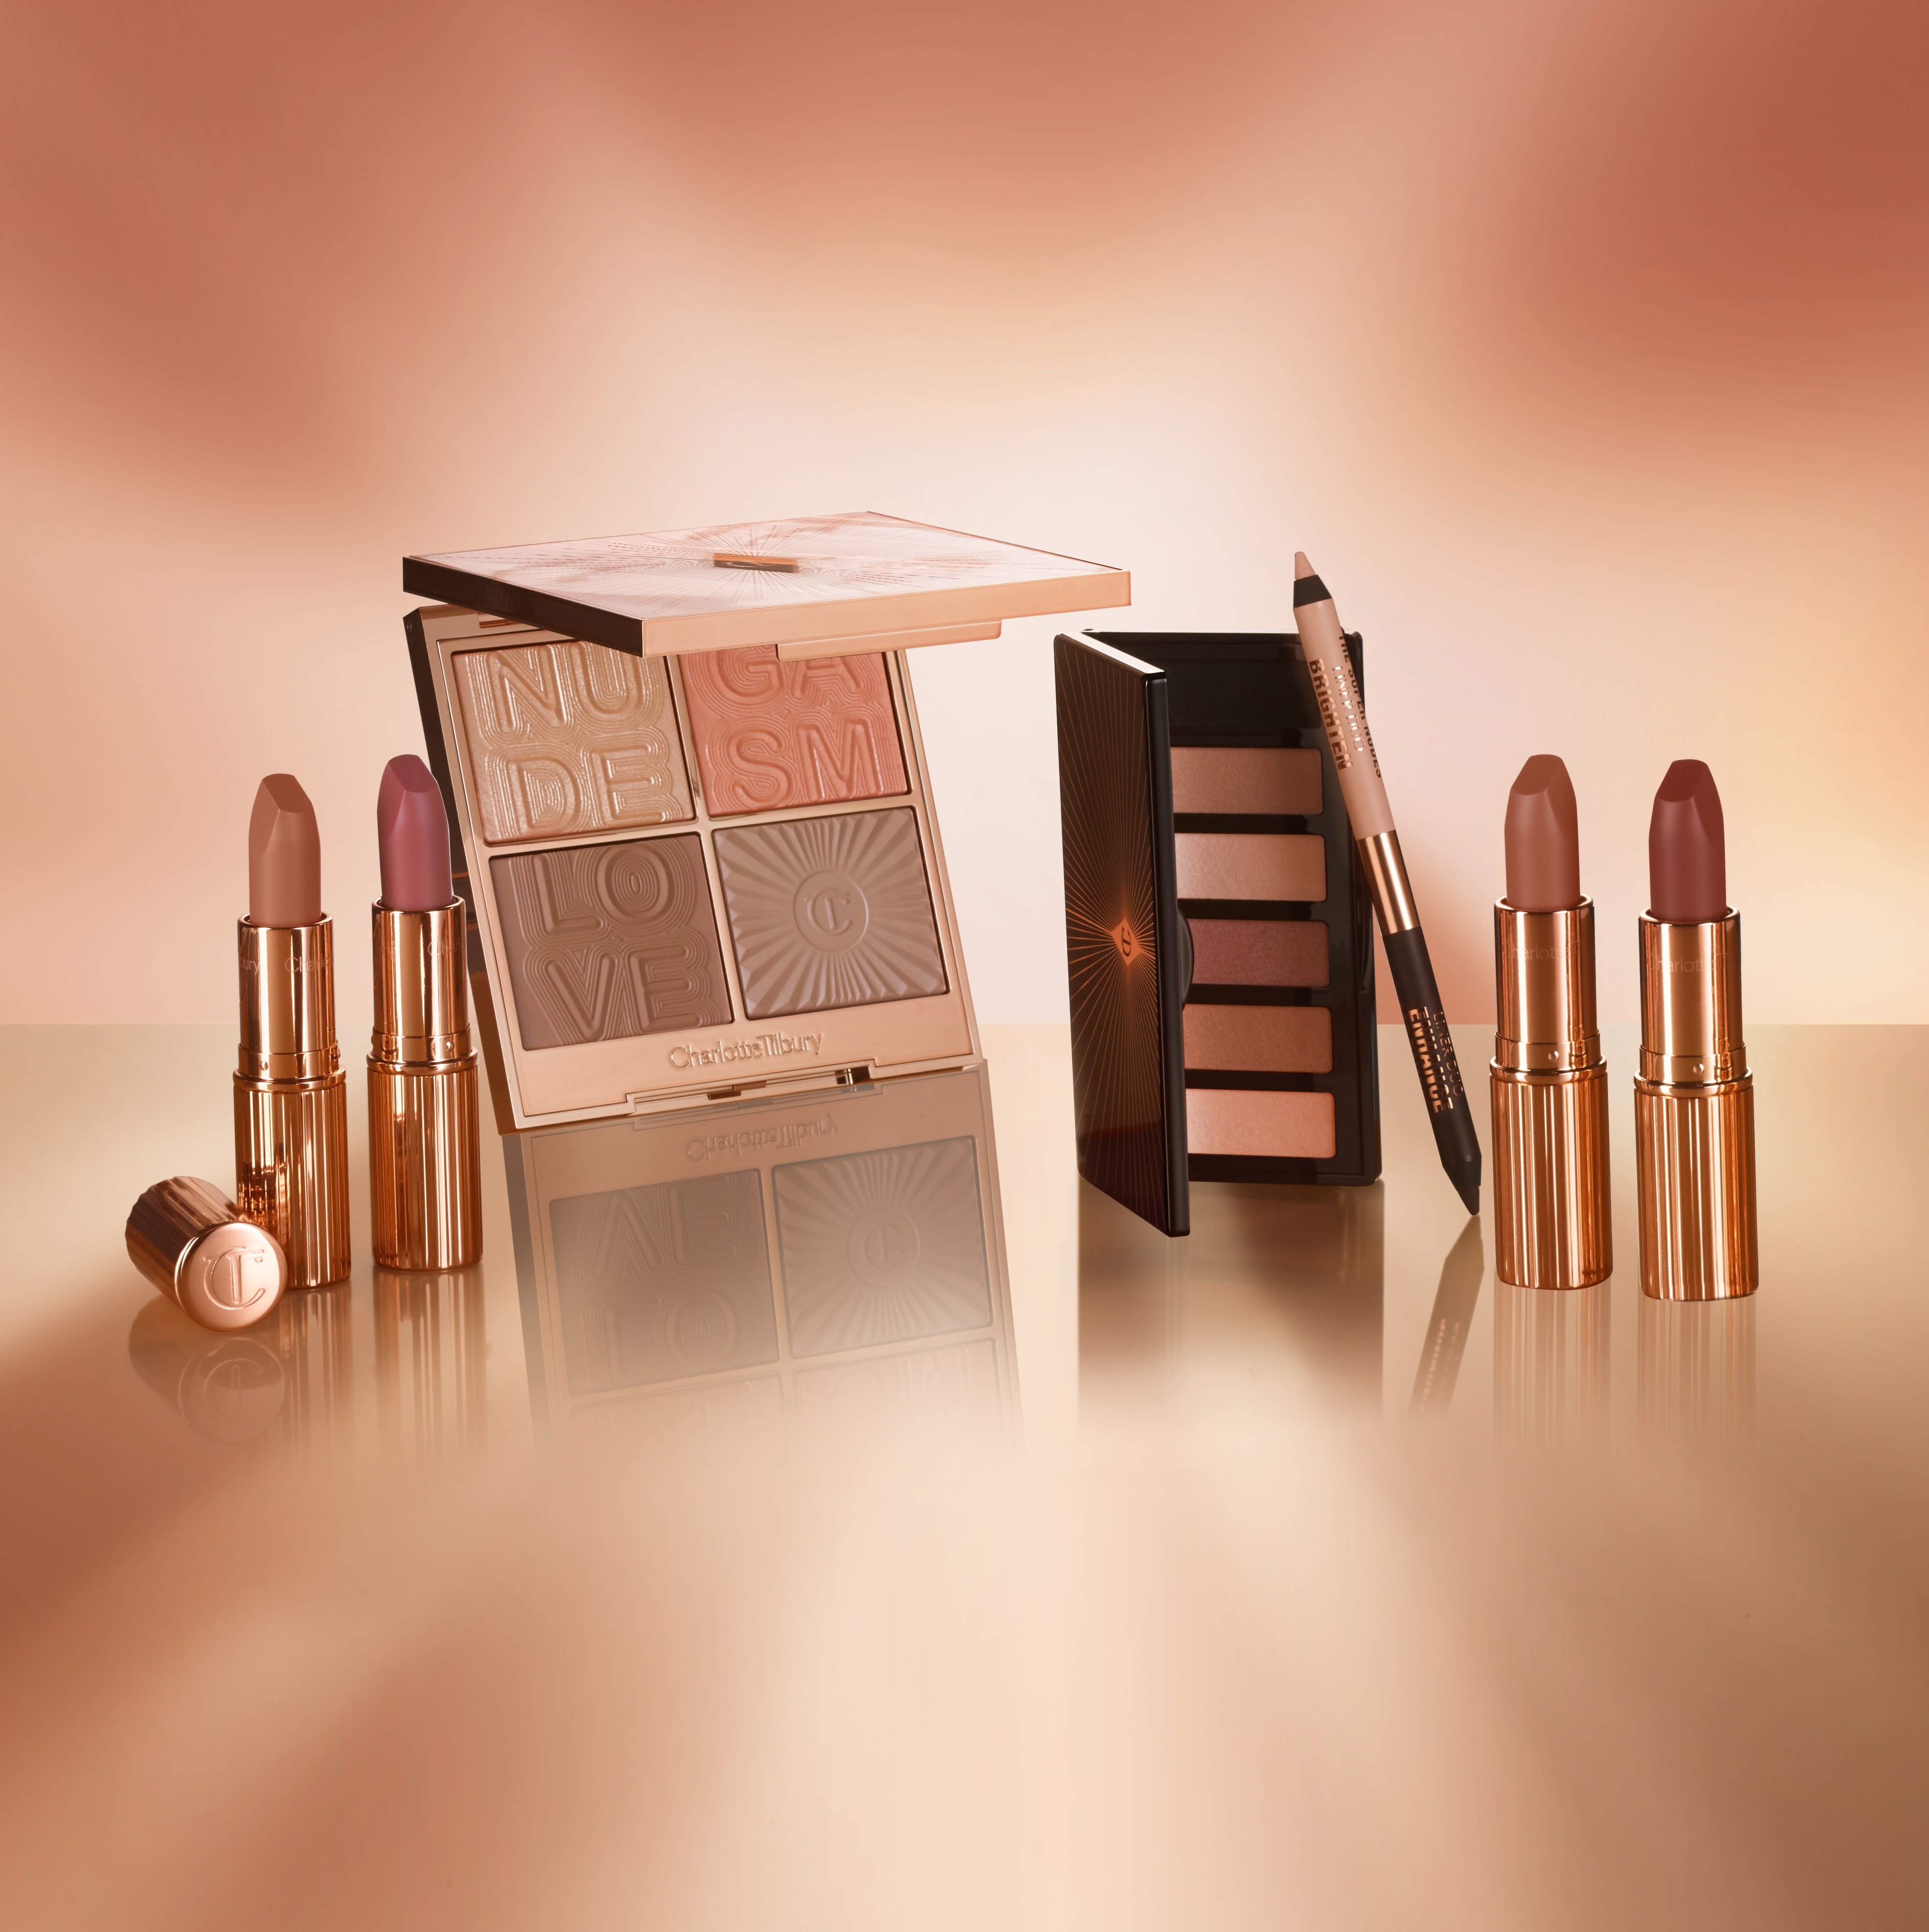 Banner with four, open lipsticks in nude shades of pink and brown, an open highlighter and blush palette with glowy gold and nude brown and peach shades, a 6-pan eyeshadow palette with nude brown, peach, and black shades, and a double-ended eyeliner pen in beige and black colour.